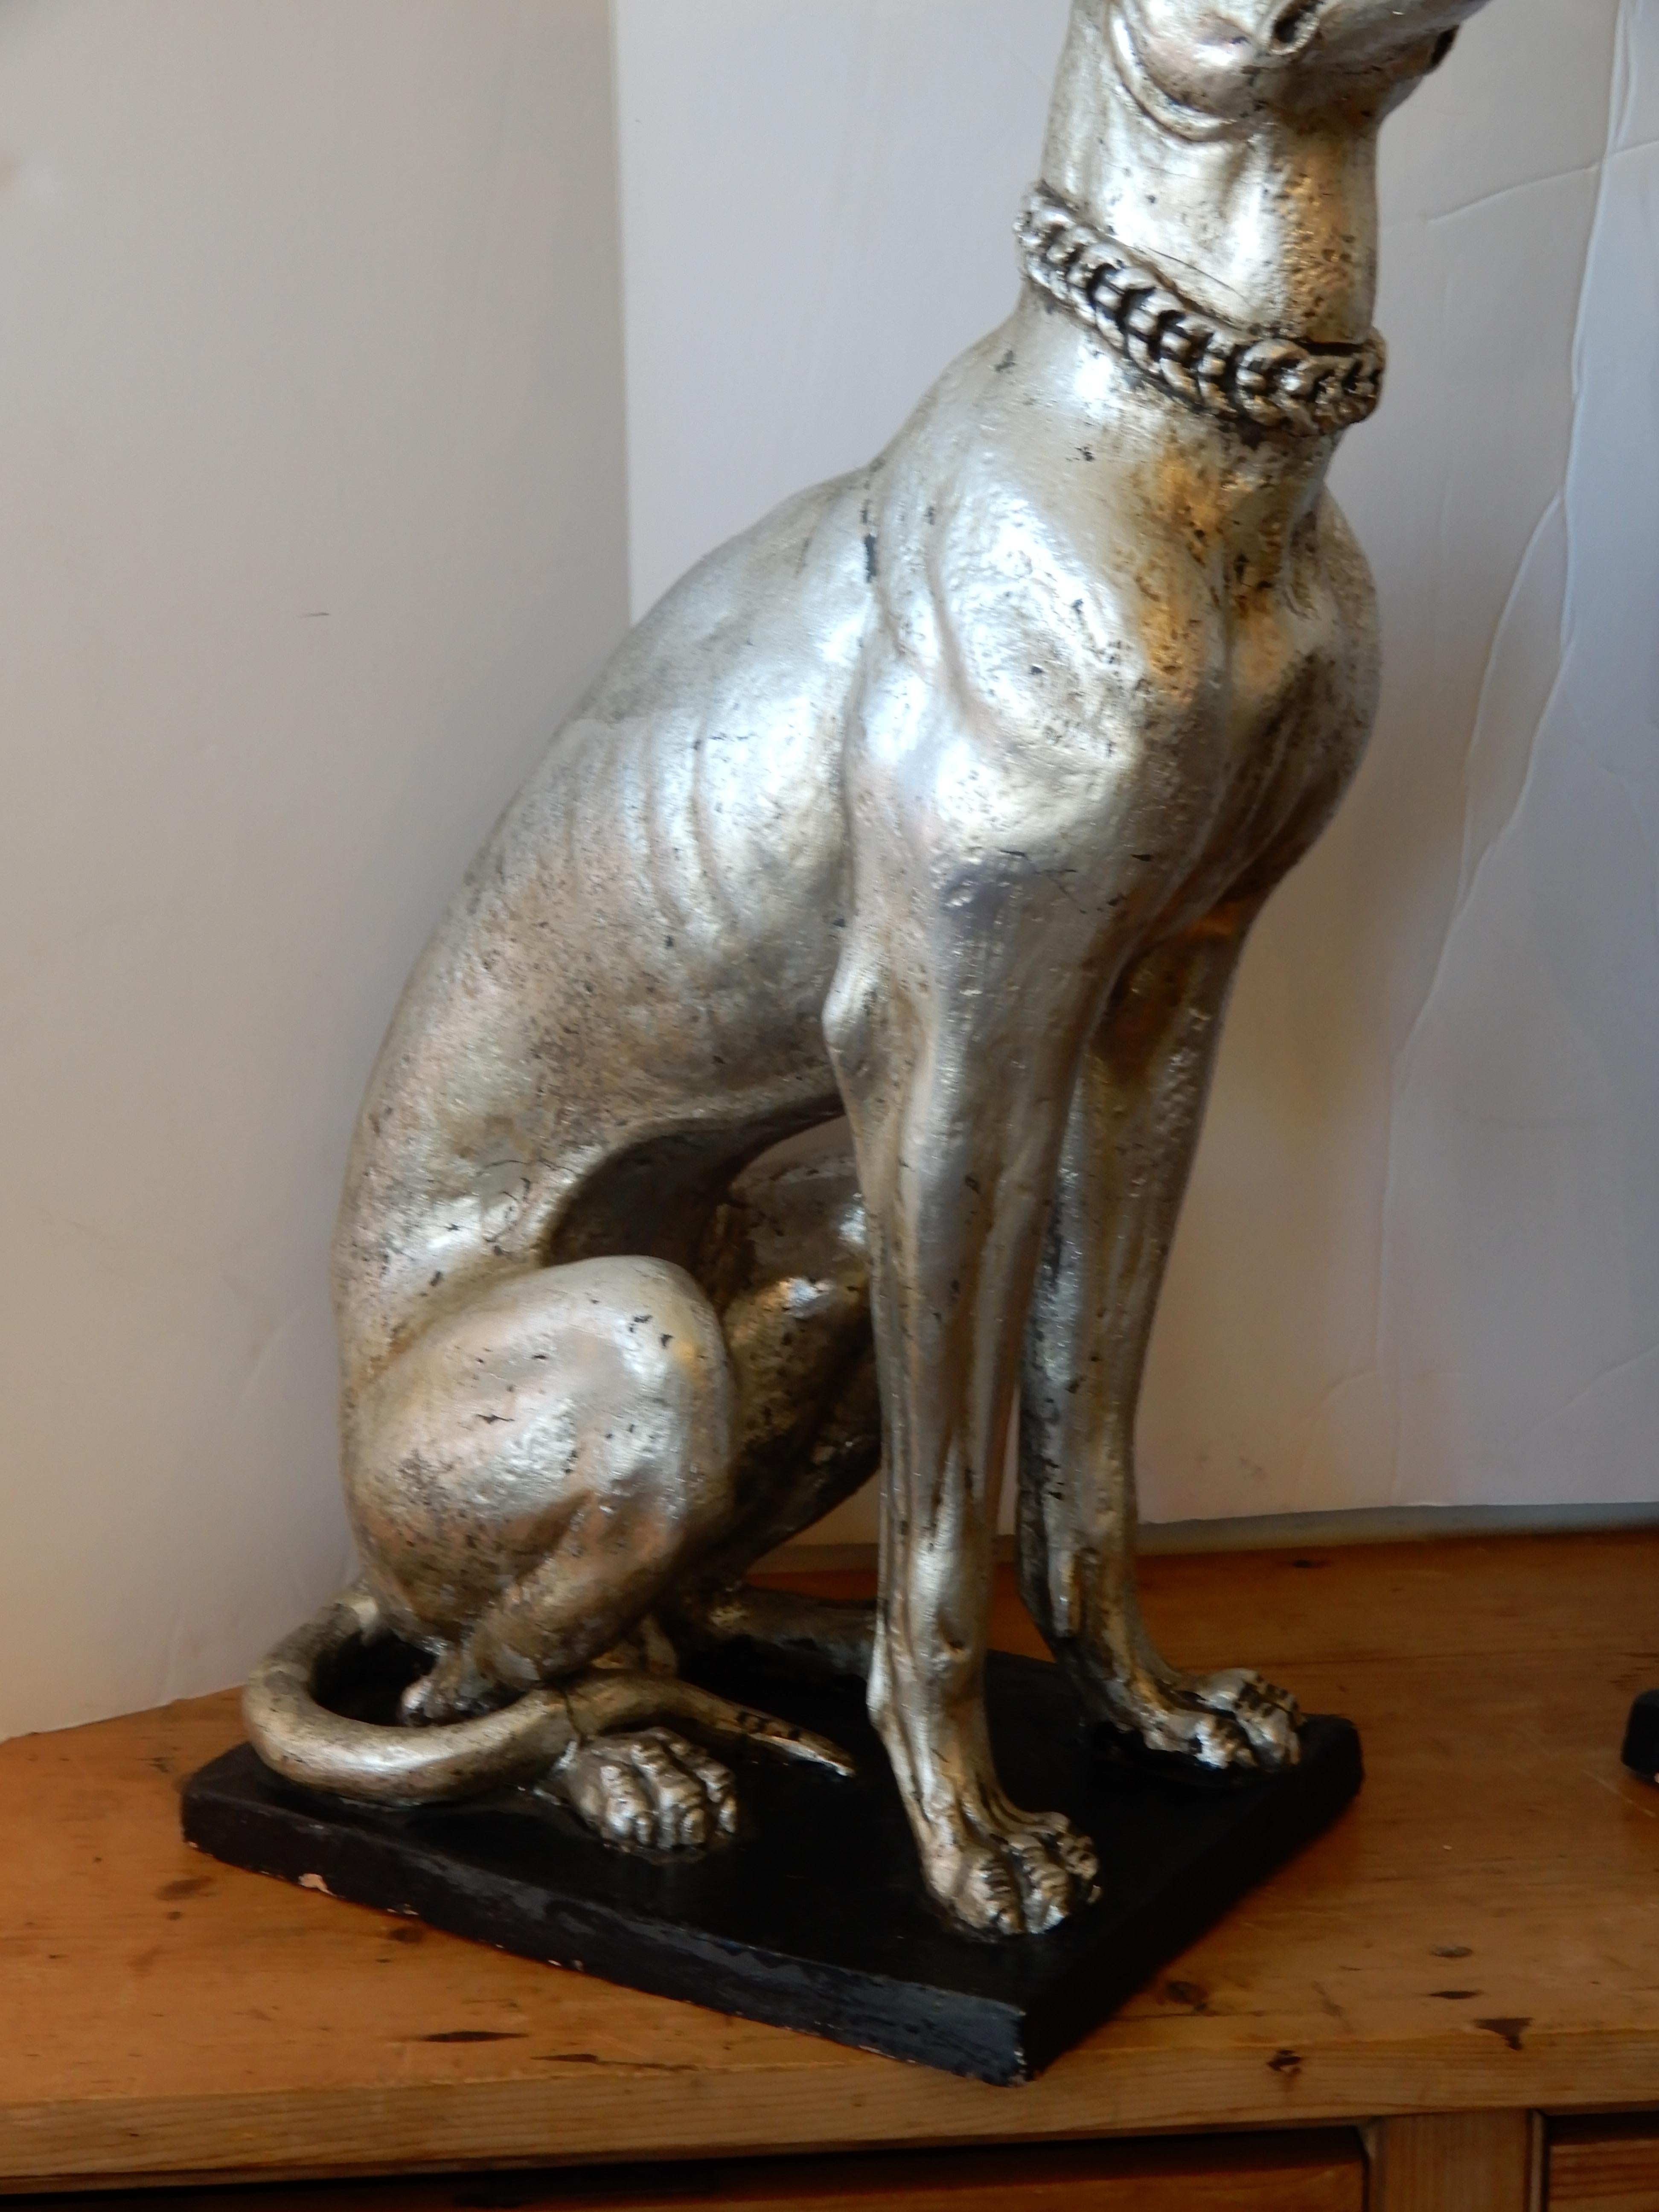 A wonderful pair of Art Deco whippet dogs from England which formally sat left and right of a large fireplace, look good on the floor or up high, both sitting on a black metal stand and looking rather proud.
The stand measures 14 x 10.
The dogs